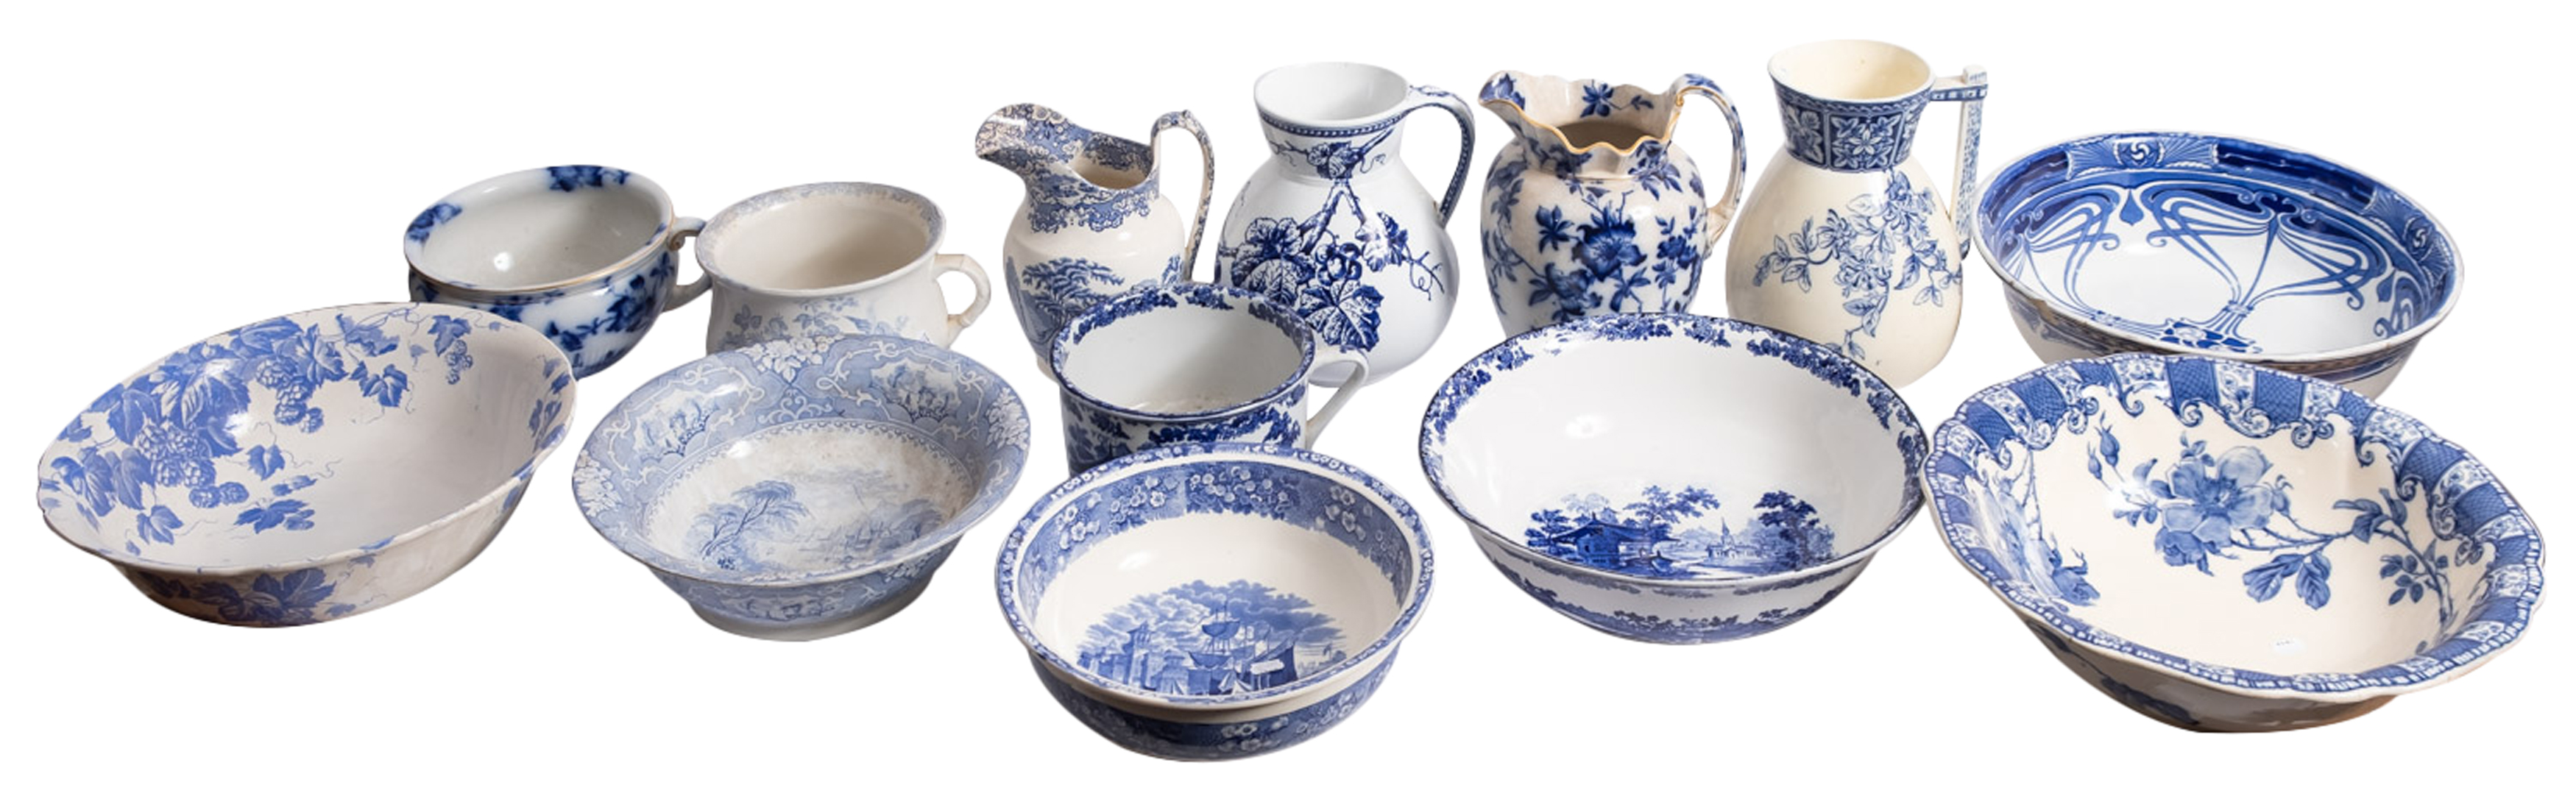 A collection of Staffordshire pottery, blue and white transfer decorated chamberwares,